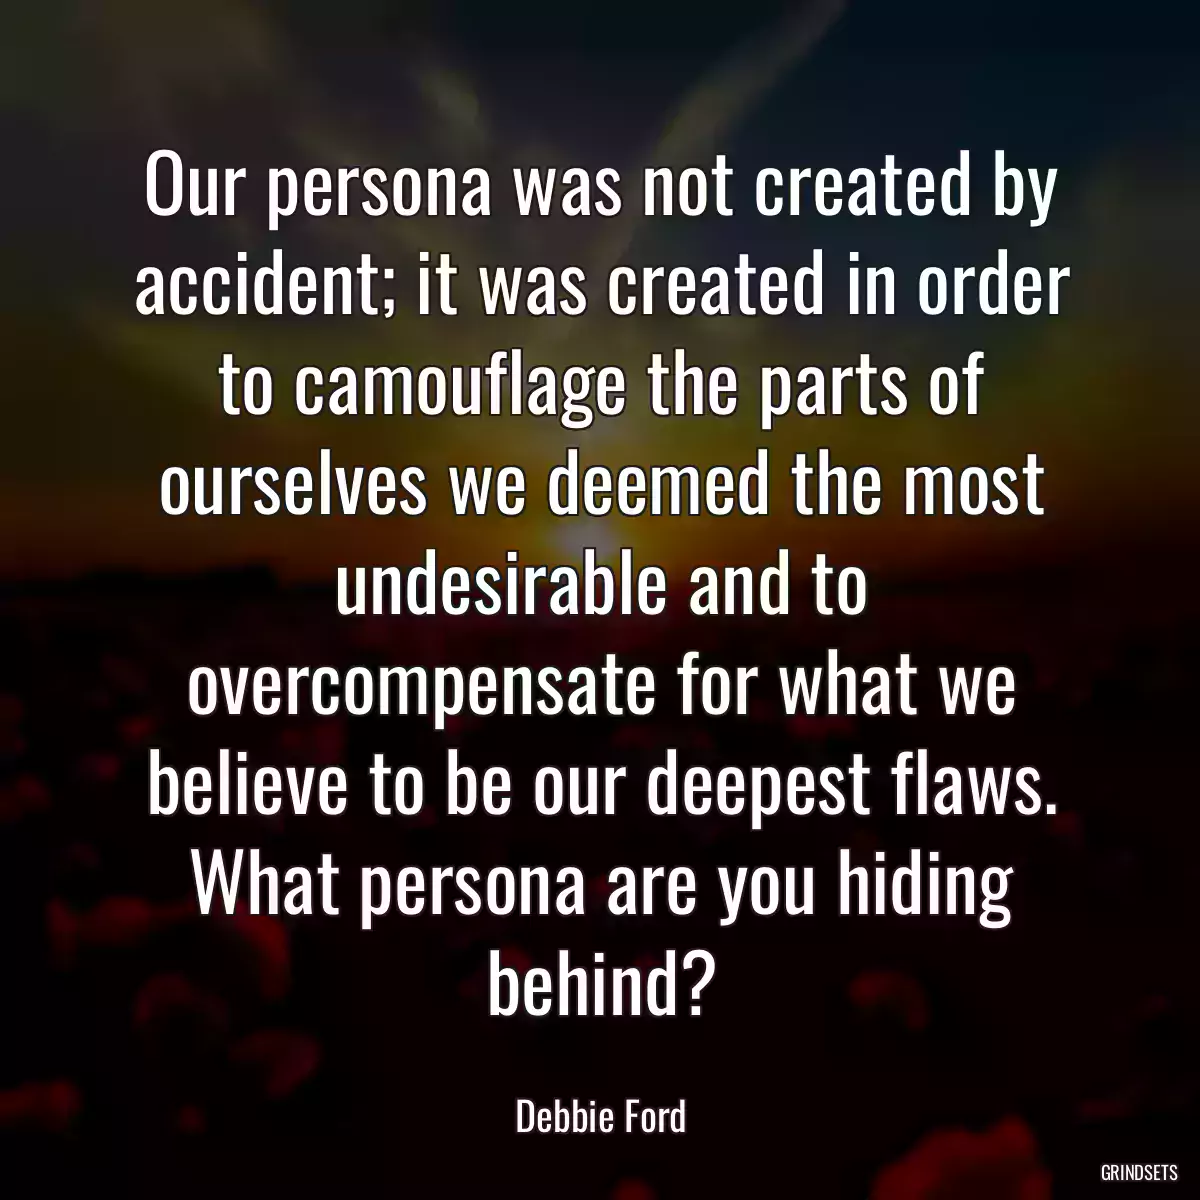 Our persona was not created by accident; it was created in order to camouflage the parts of ourselves we deemed the most undesirable and to overcompensate for what we believe to be our deepest flaws. What persona are you hiding behind?